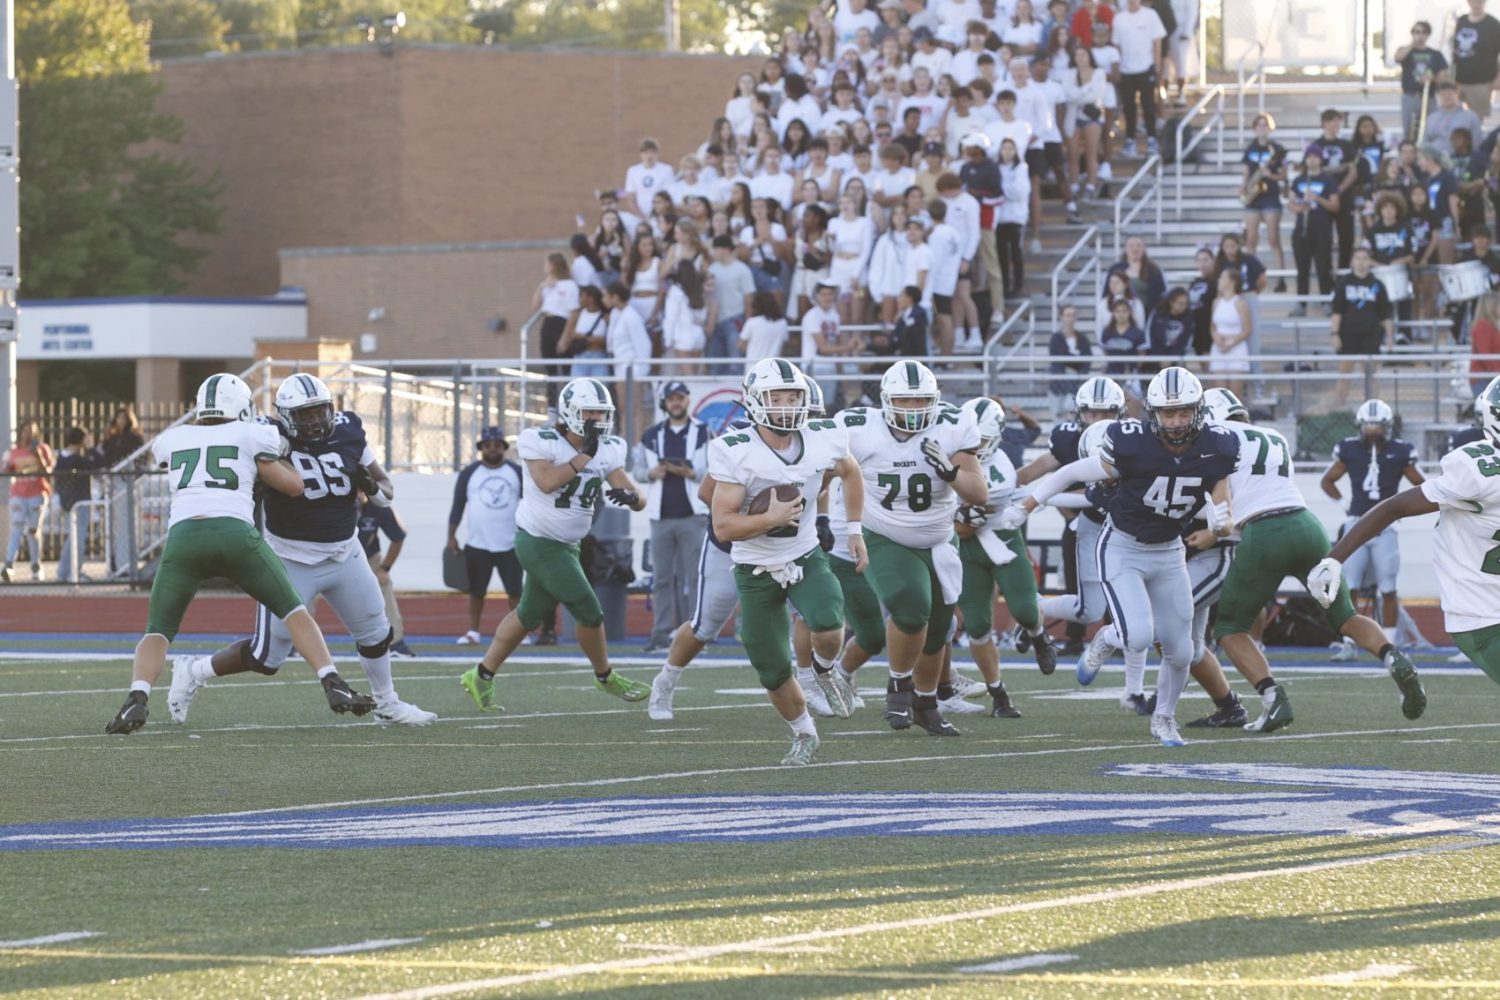 Johnson scores five touchdowns in Reeths-Puffer’s victory over Farmington